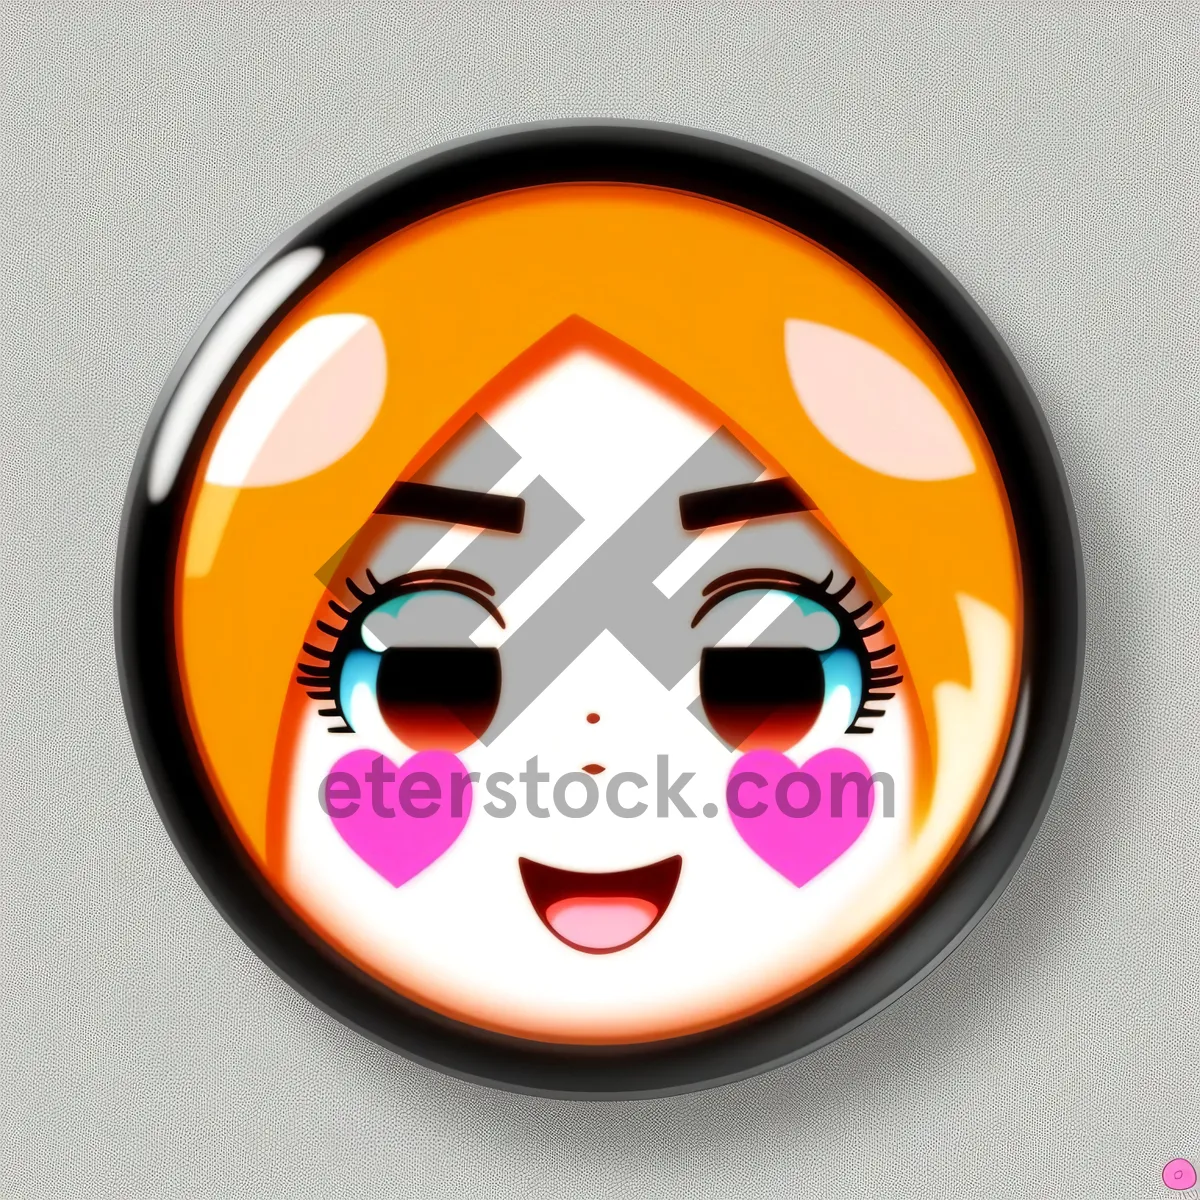 Picture of Shiny Cartoon Facial Button - Yellow Round Icon